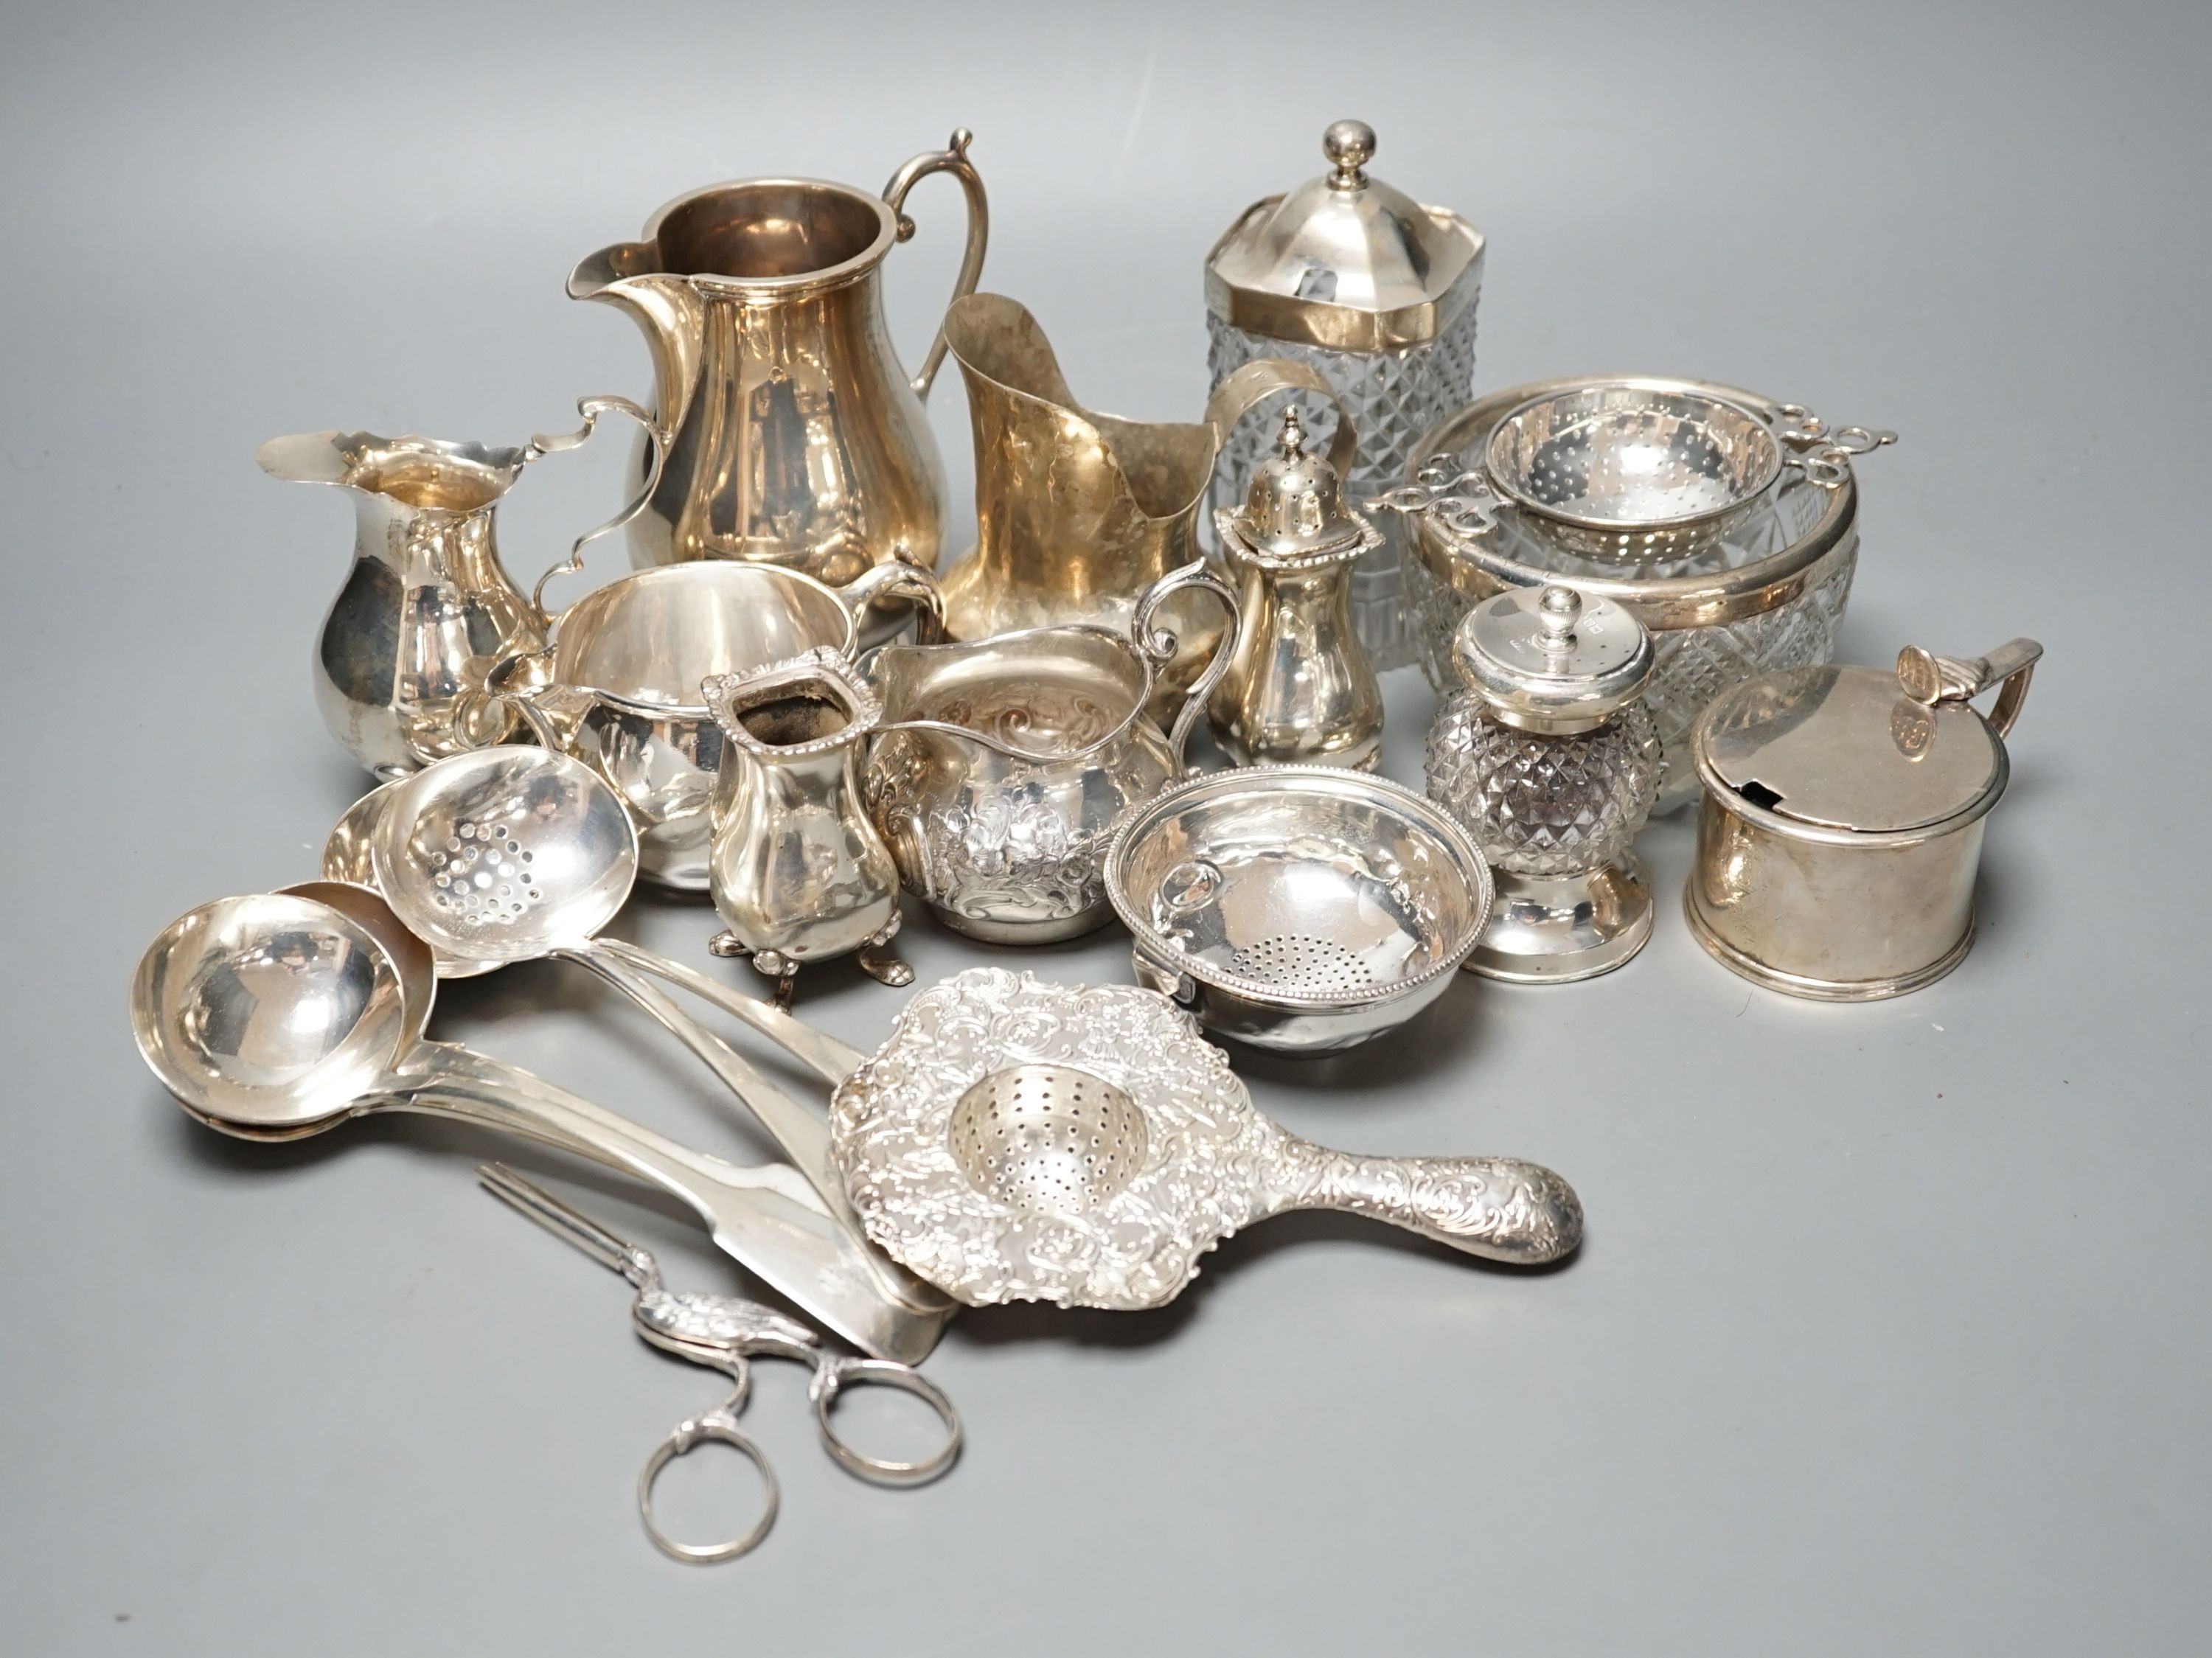 A mixed collection of small silver and sterling items, to include five assorted small ladles, cream jugs, Georgian mustard, bowls etc.